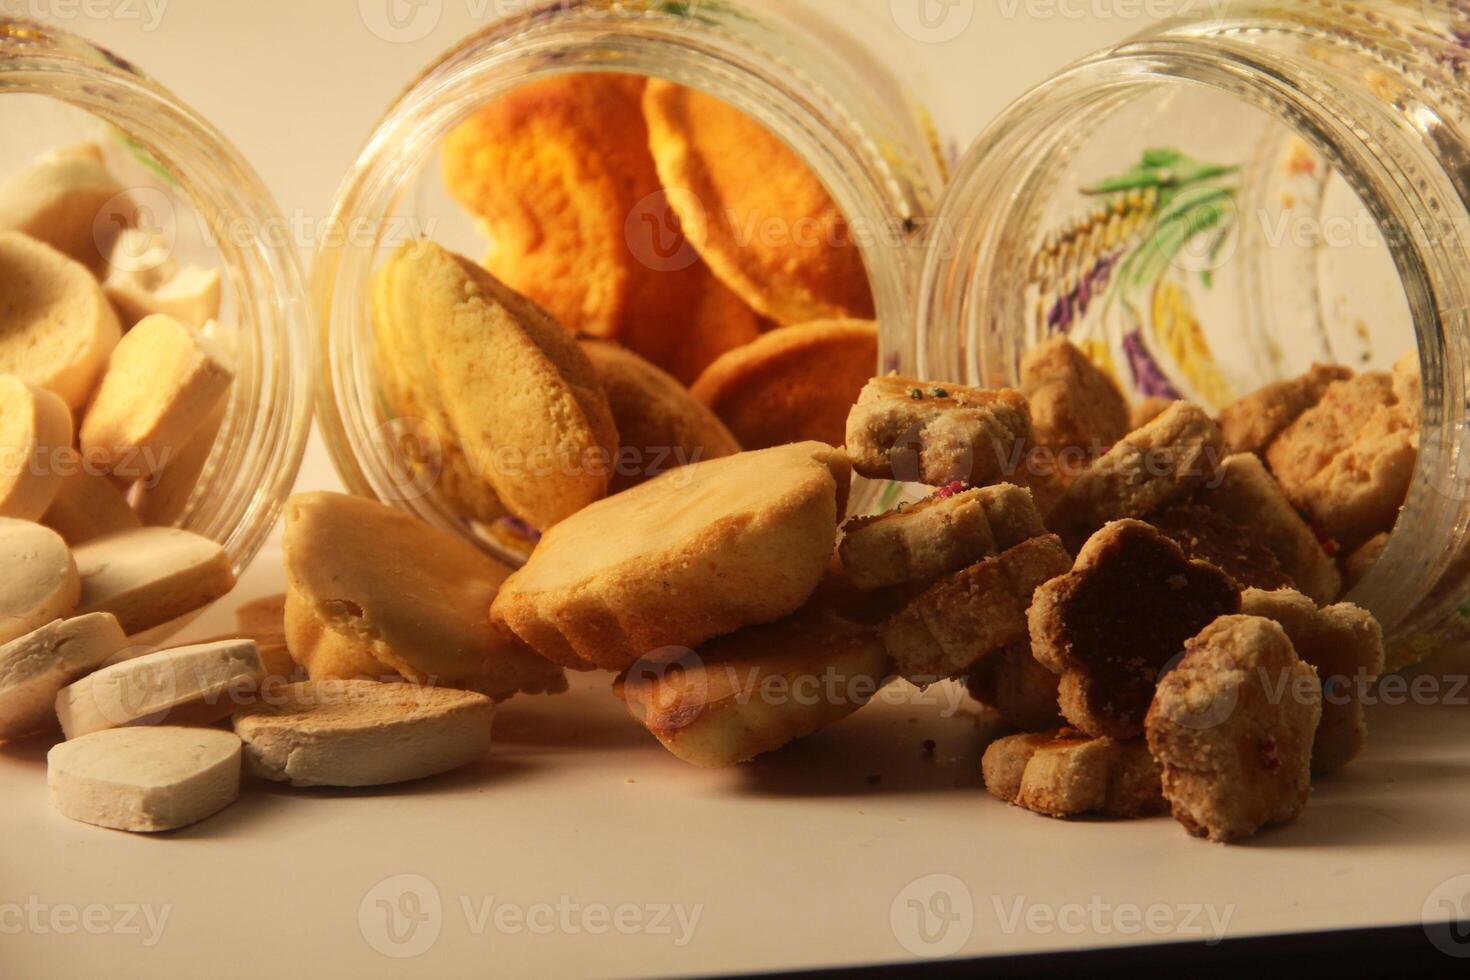 Eid cookies are often used as snacks when gathering with visiting family and relatives photo